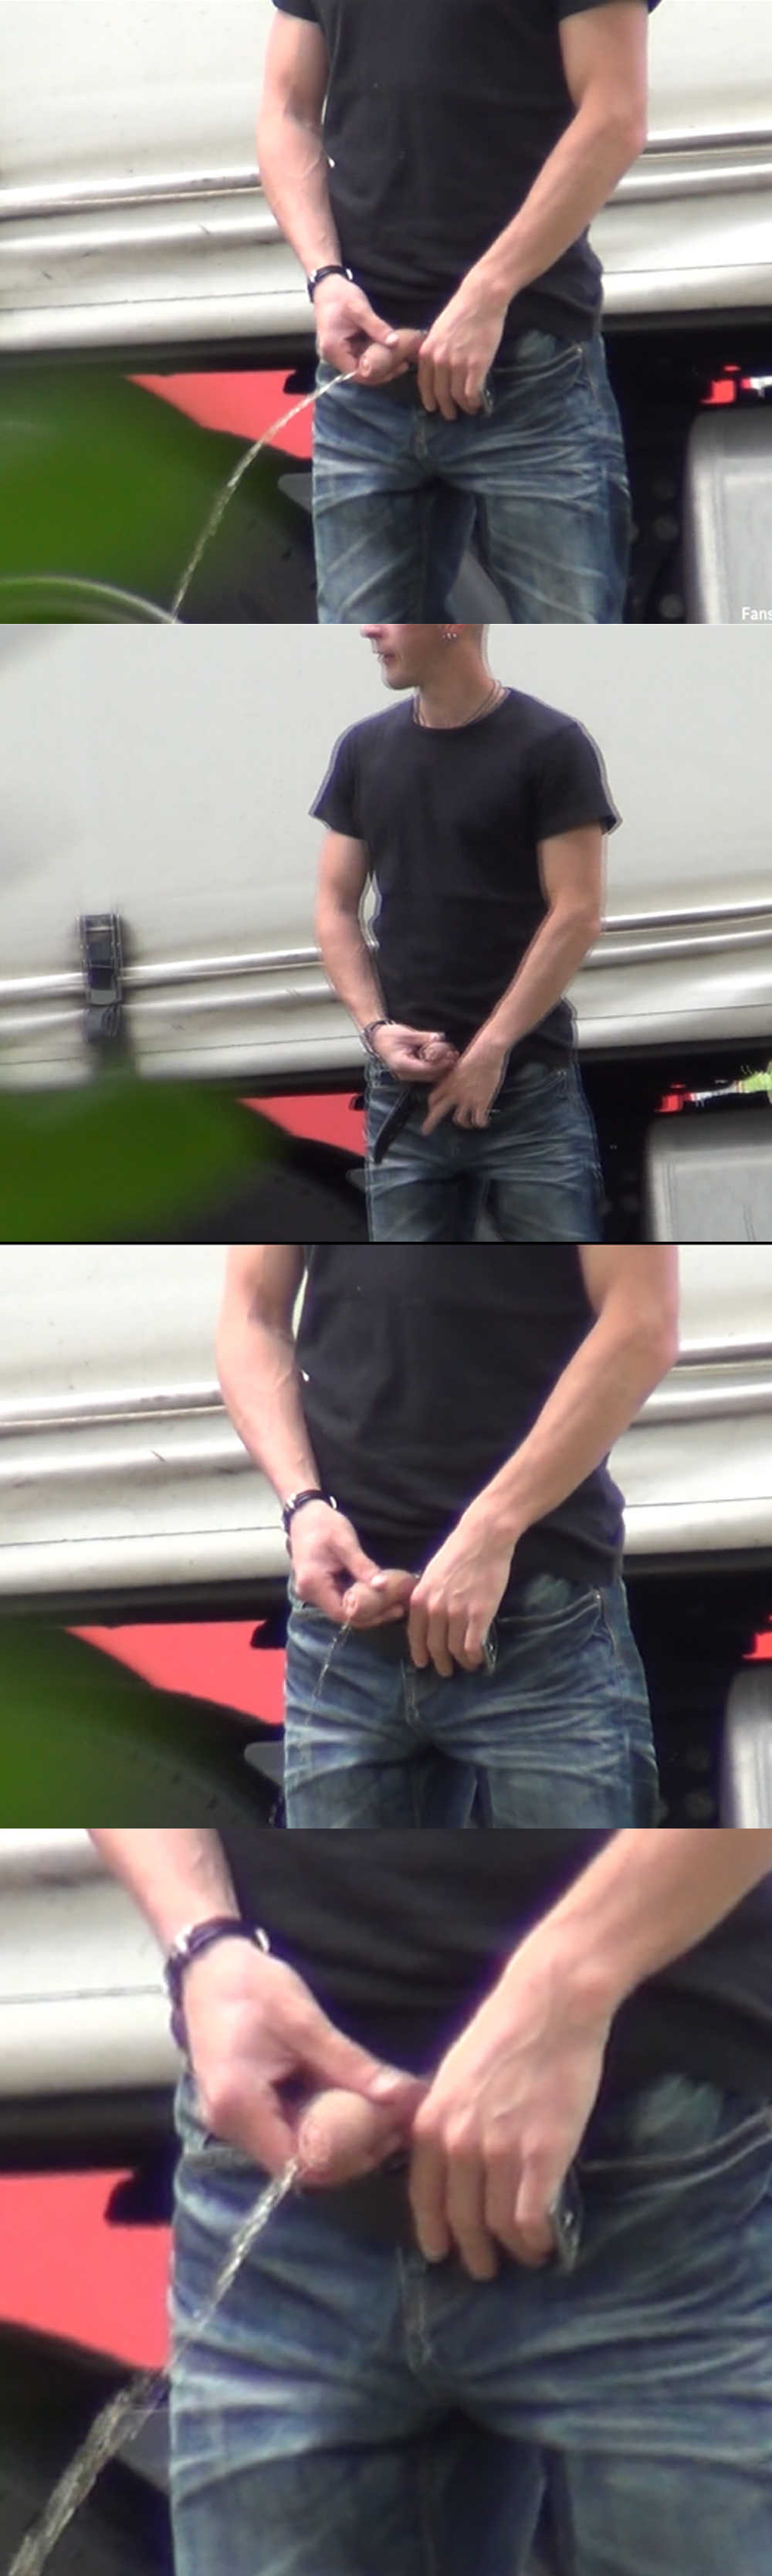 hung uncut trucker caught peeing by spycam in public